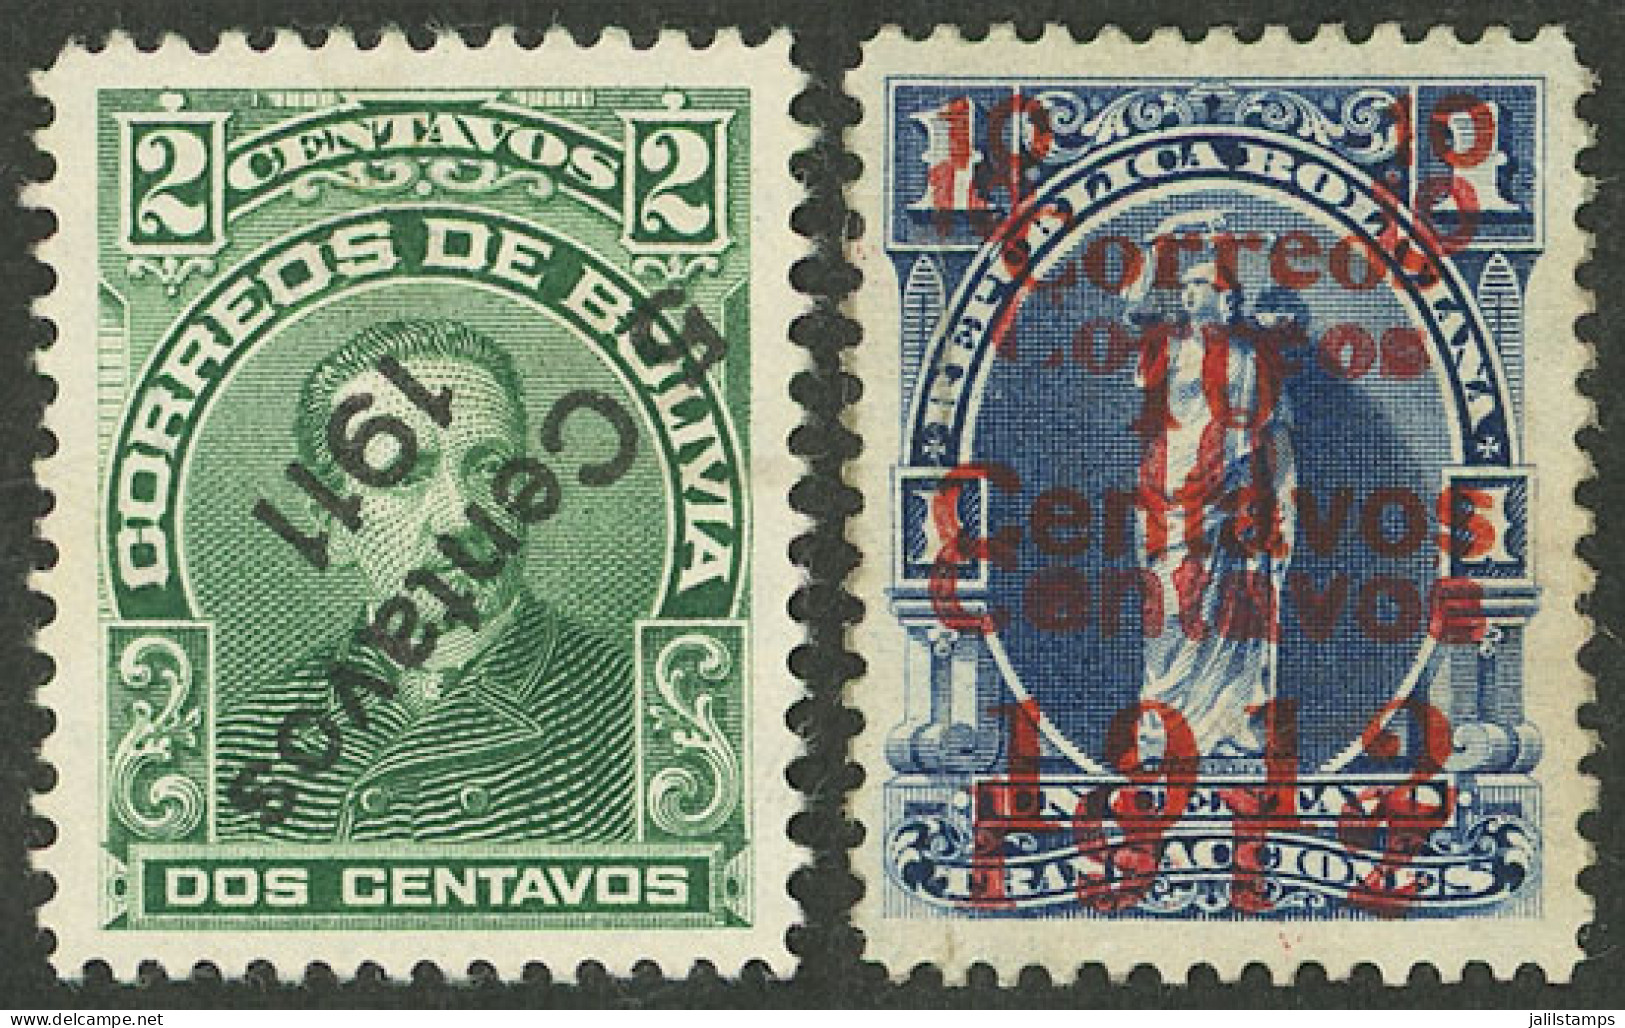 BOLIVIA: 2 Stamps Of 1911/2 With Varieties: Inverted And Double Overprint, Mint Without Gum, VF Quality! - Bolivia